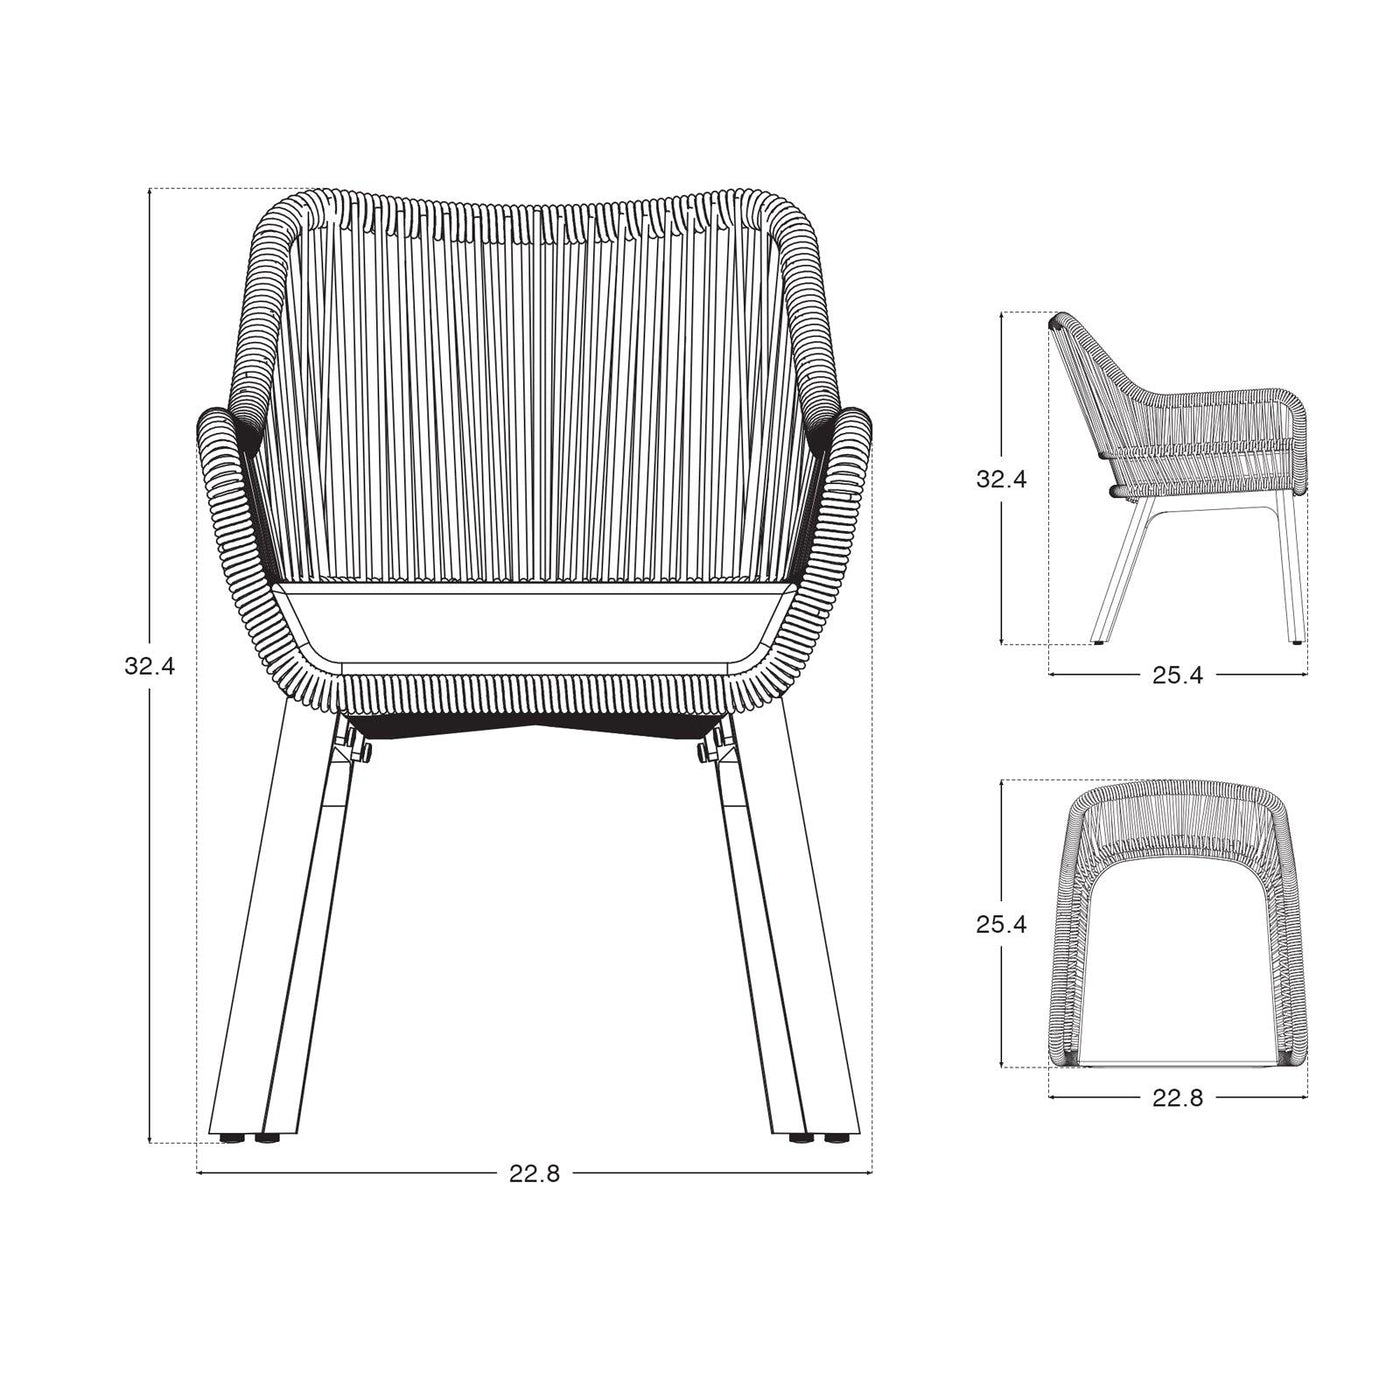  Natural Collection-Coronado Dining Arm Chairs,Dimension information, Length, height, width data information- Sunsitt Signature